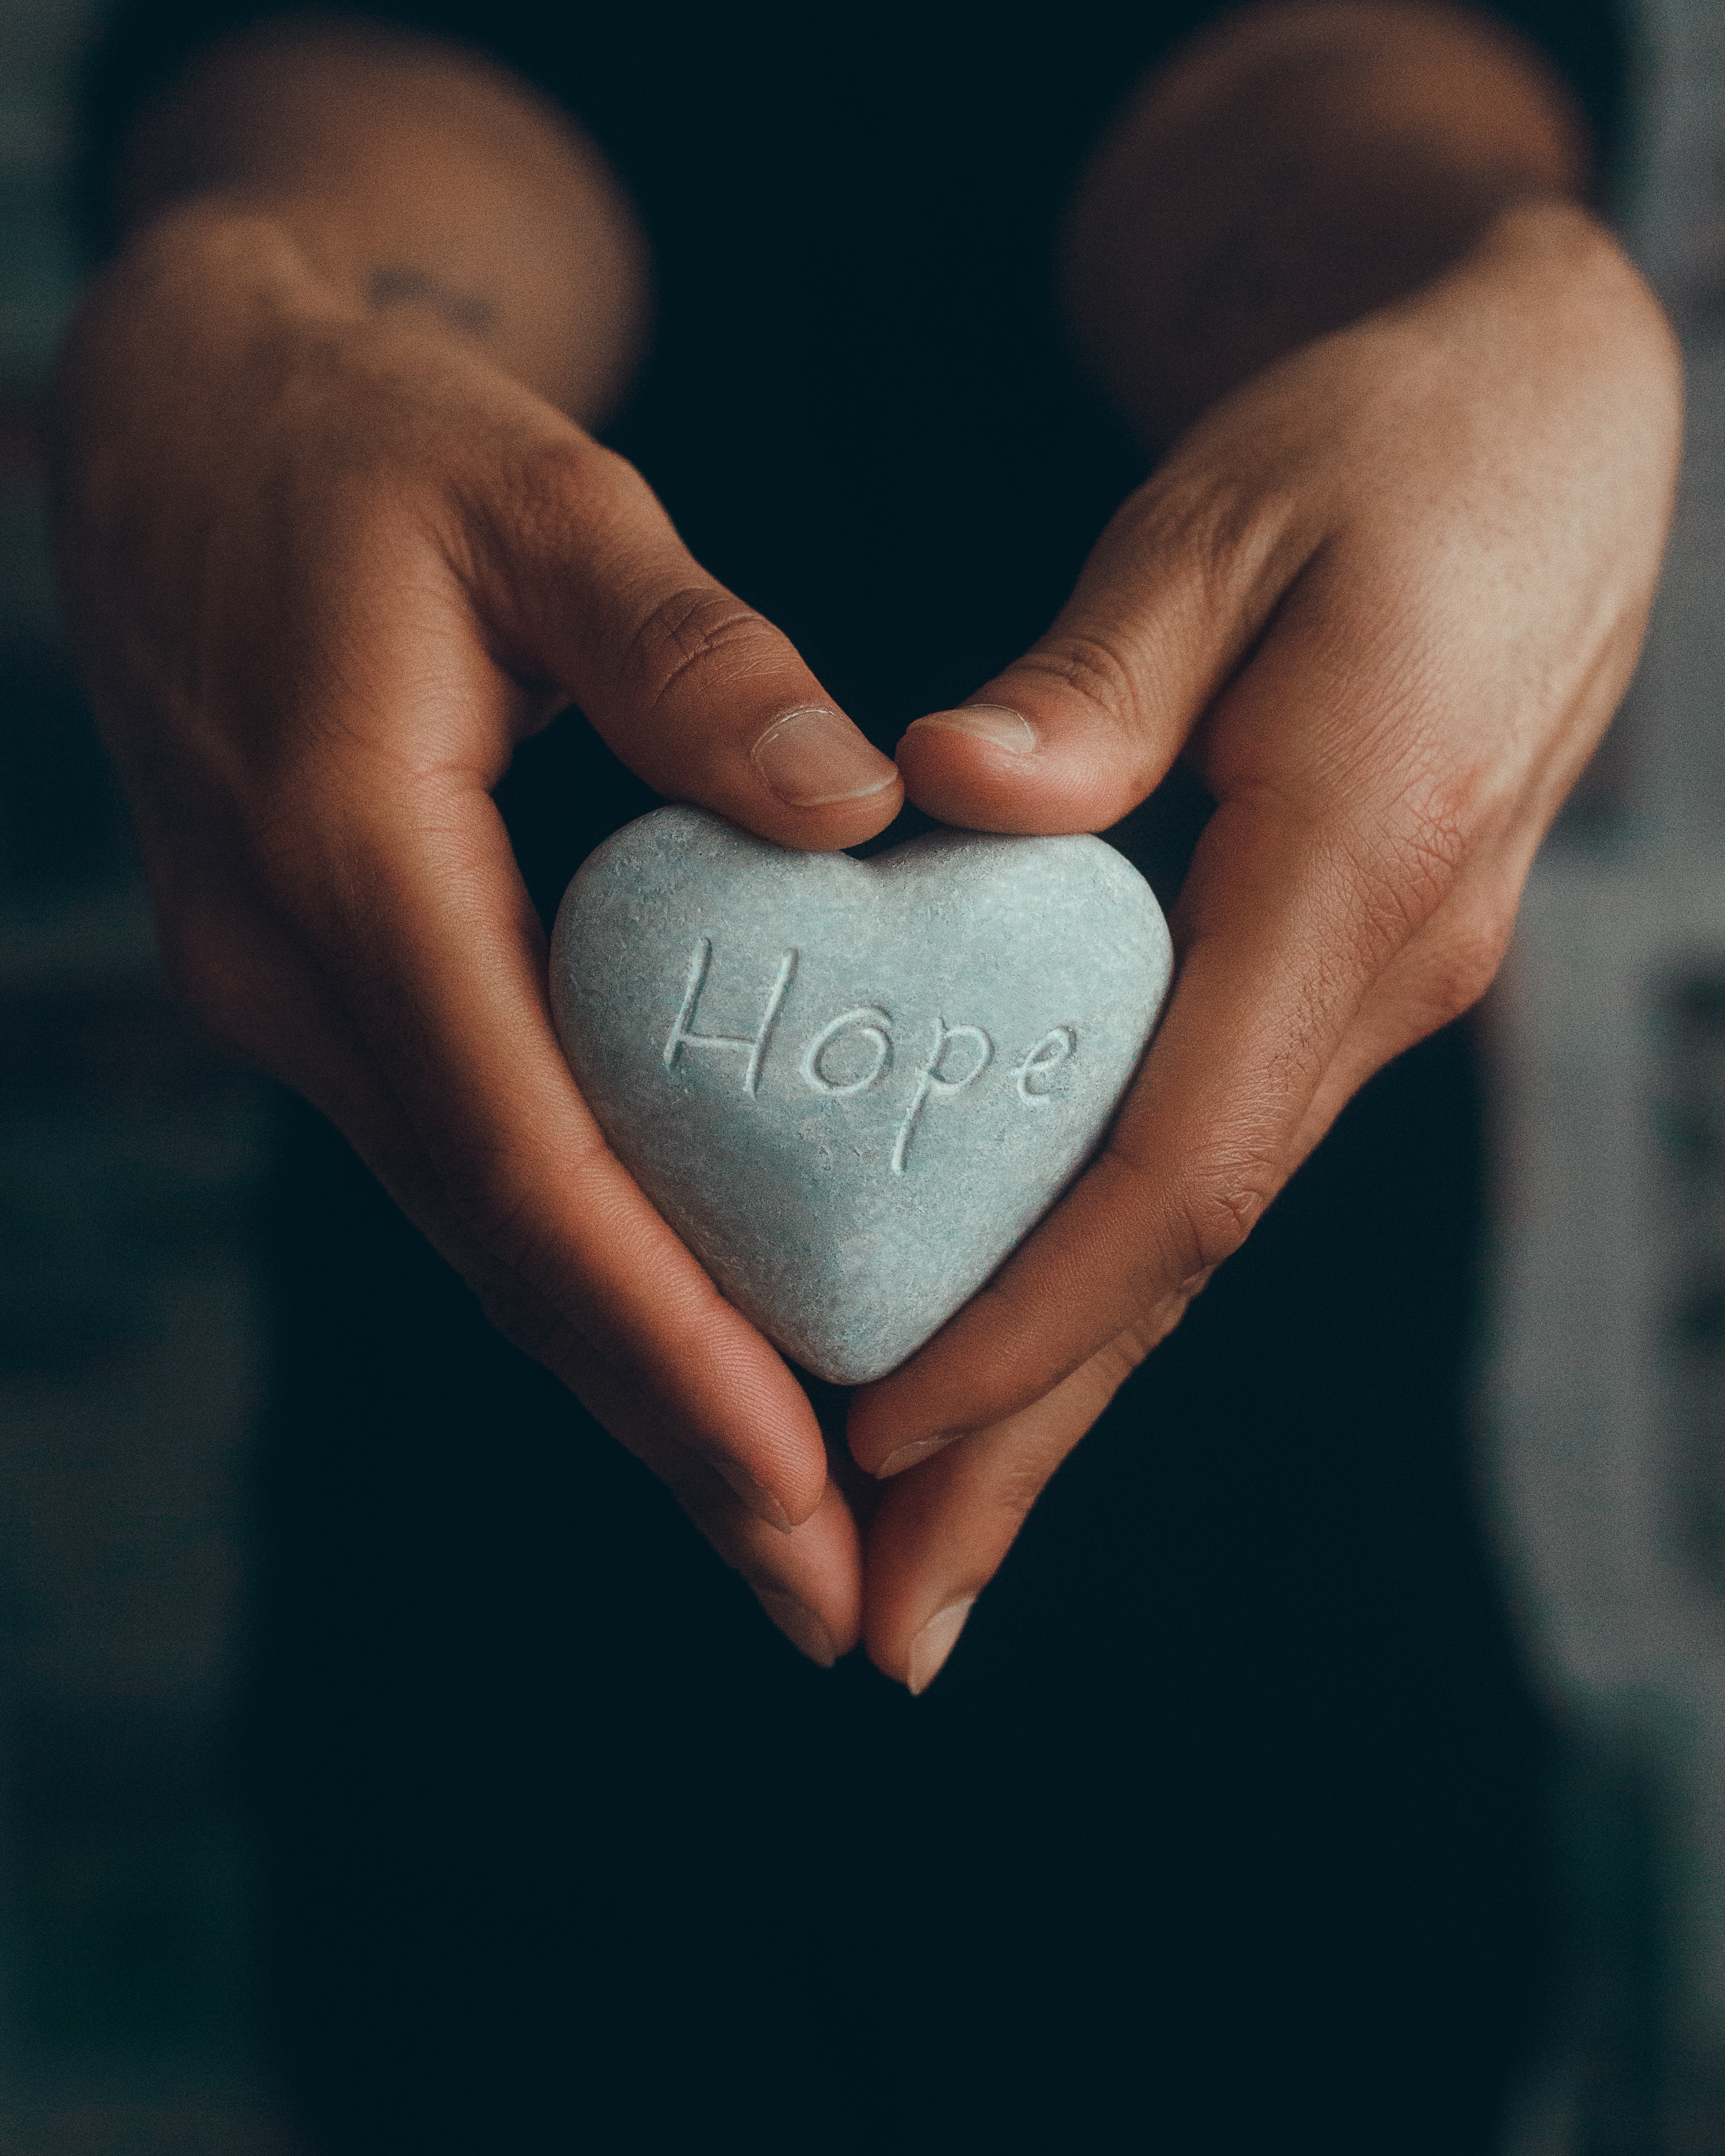 hope, inscription, heart, words, rock, hands, stone, word Phone Background